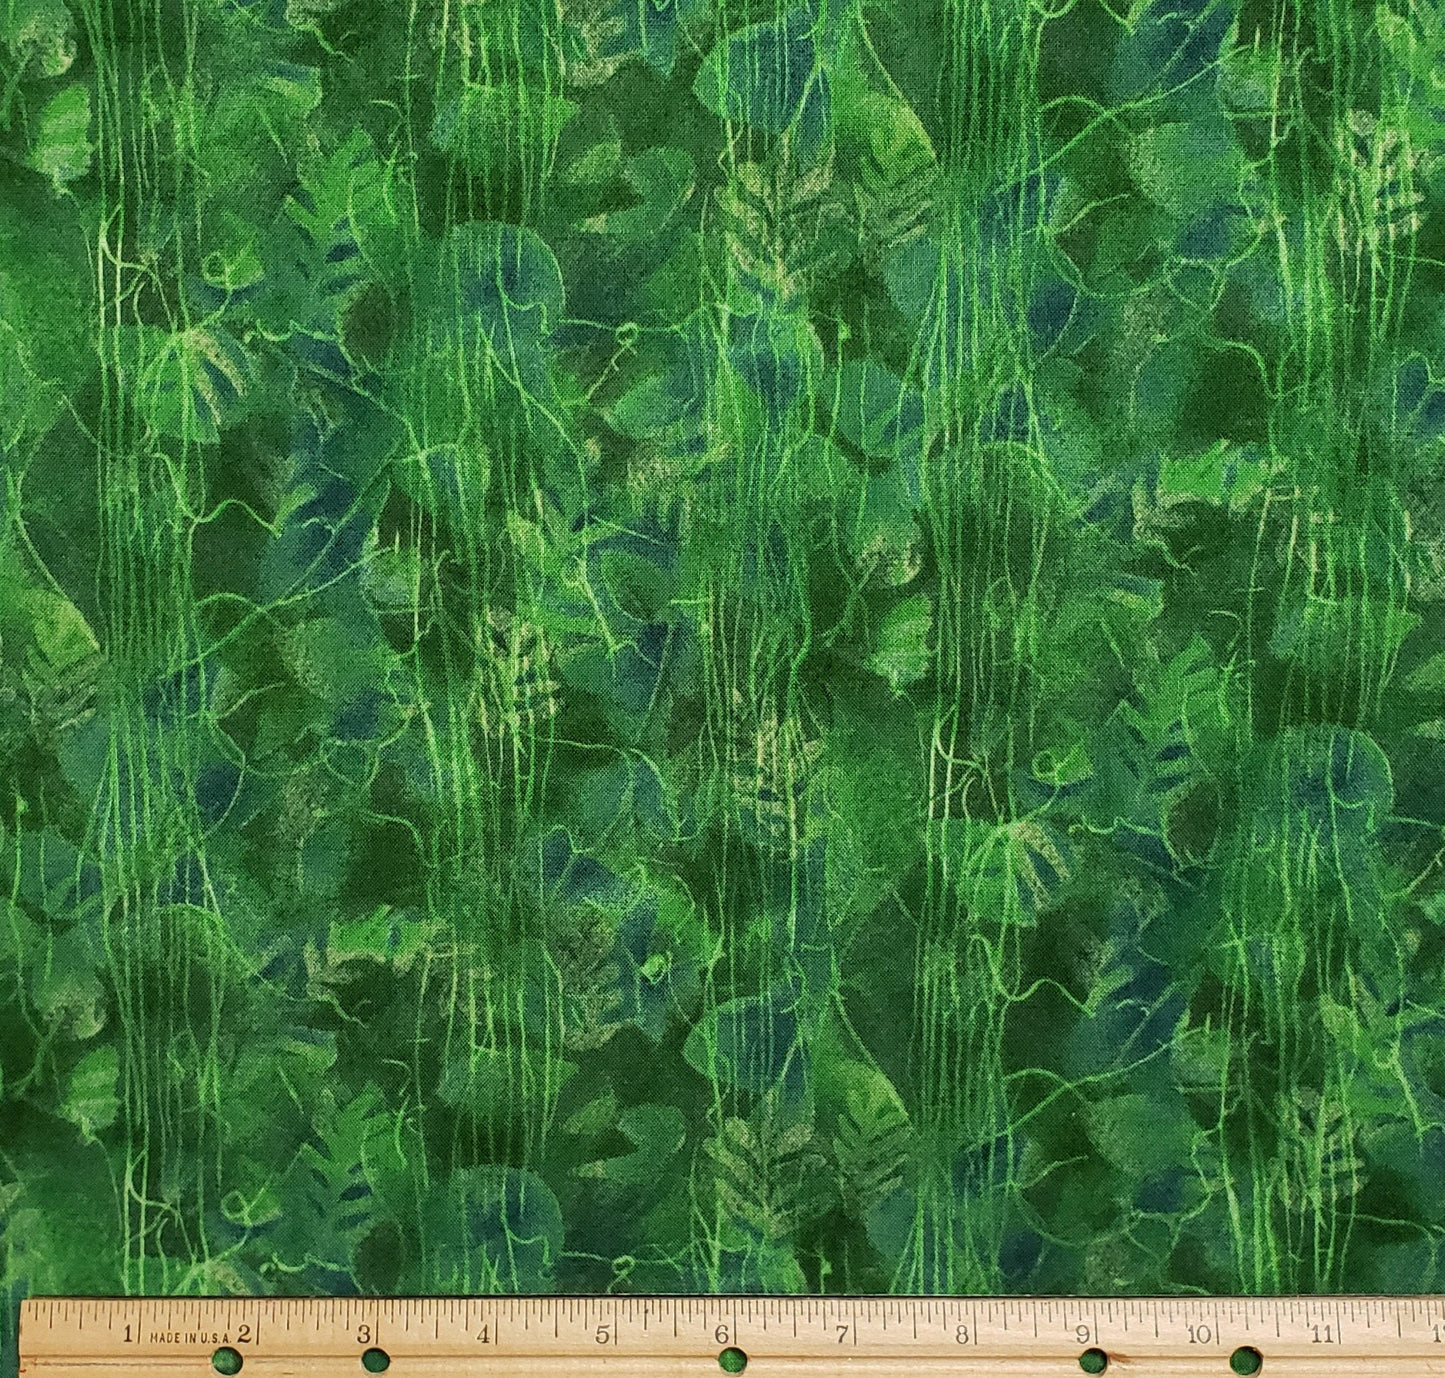 EOB - Designed Exclusively by Lauren Lee LTD for Jo-Ann Stores - Dark Green and Blue Tonal Fabric / Tone-on-Tone Leaf Vine Print